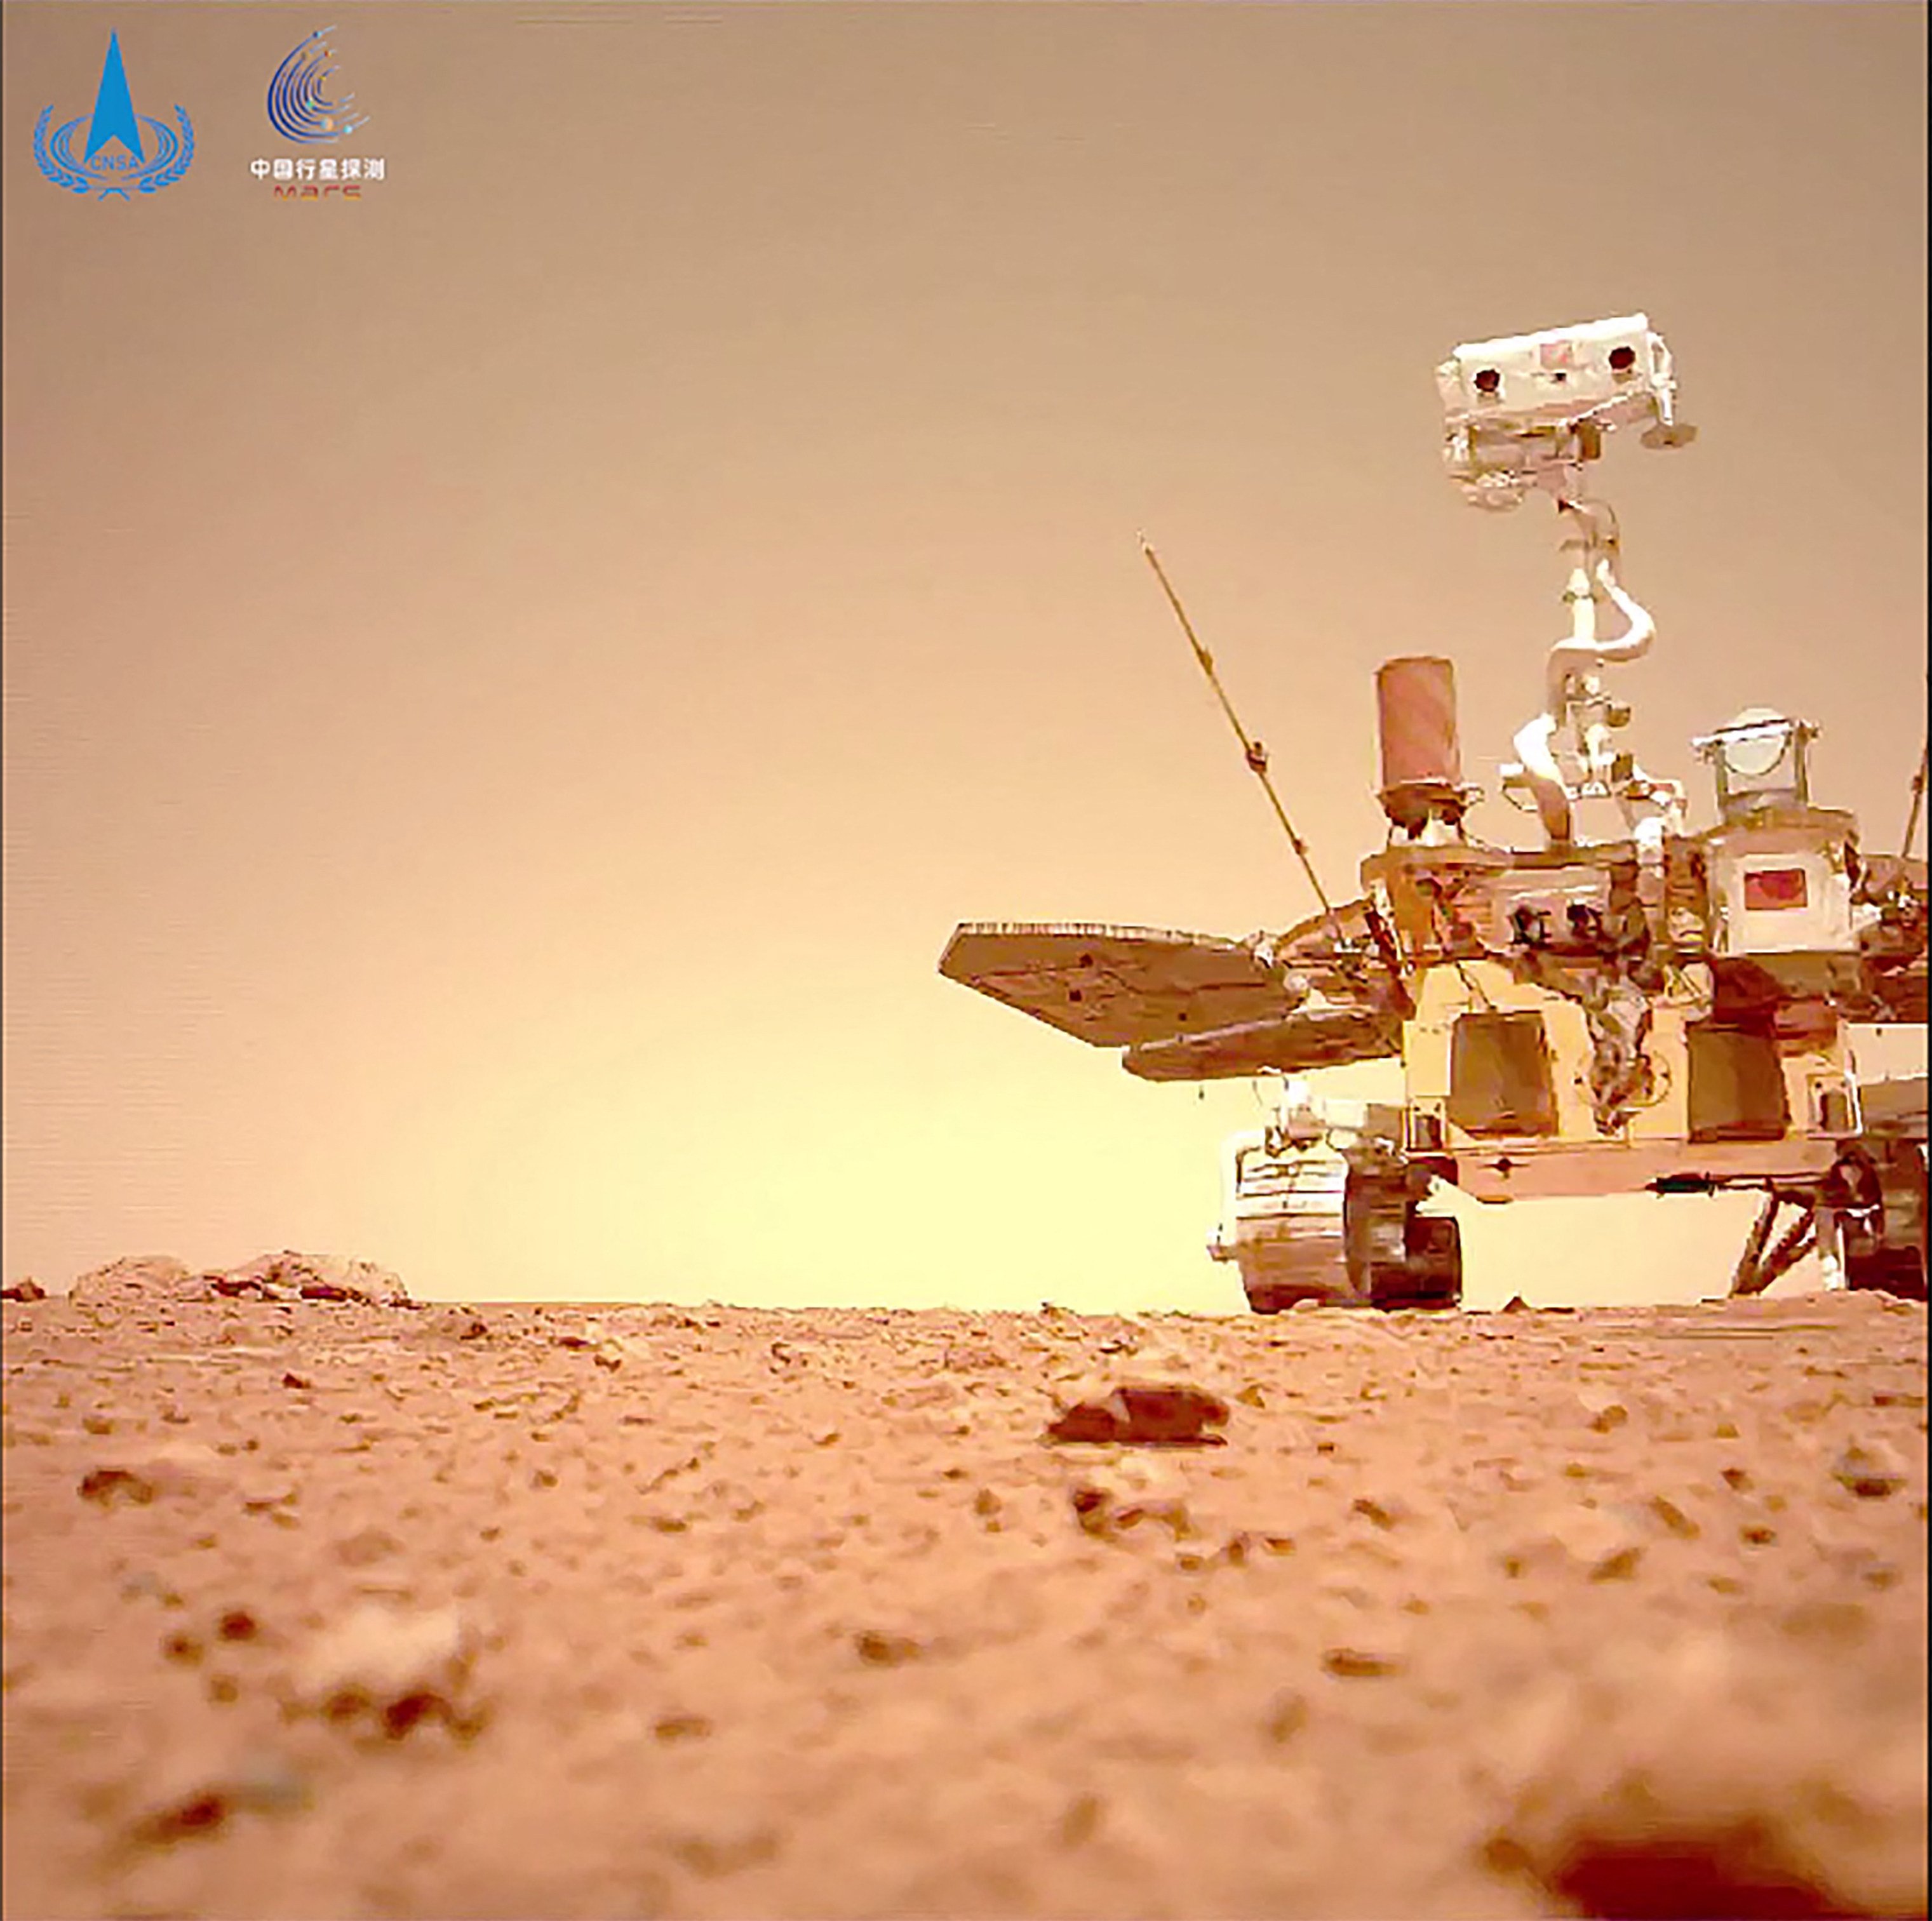 China expects to return to Mars in 2030 to collect rock samples, after its successful 2021 mission to land a rover on the planet’s surface. Photo: AFP